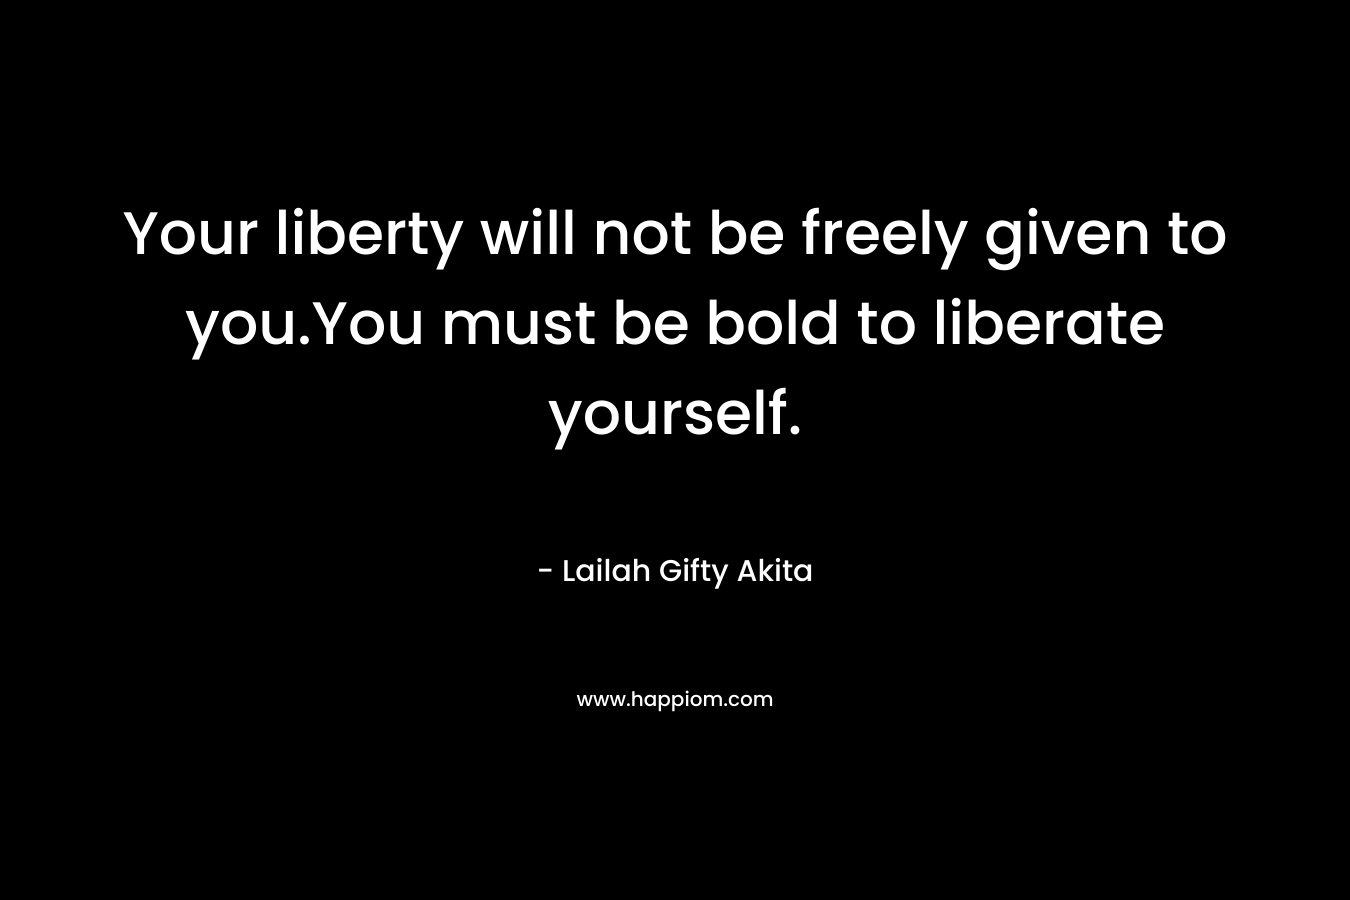 Your liberty will not be freely given to you.You must be bold to liberate yourself.